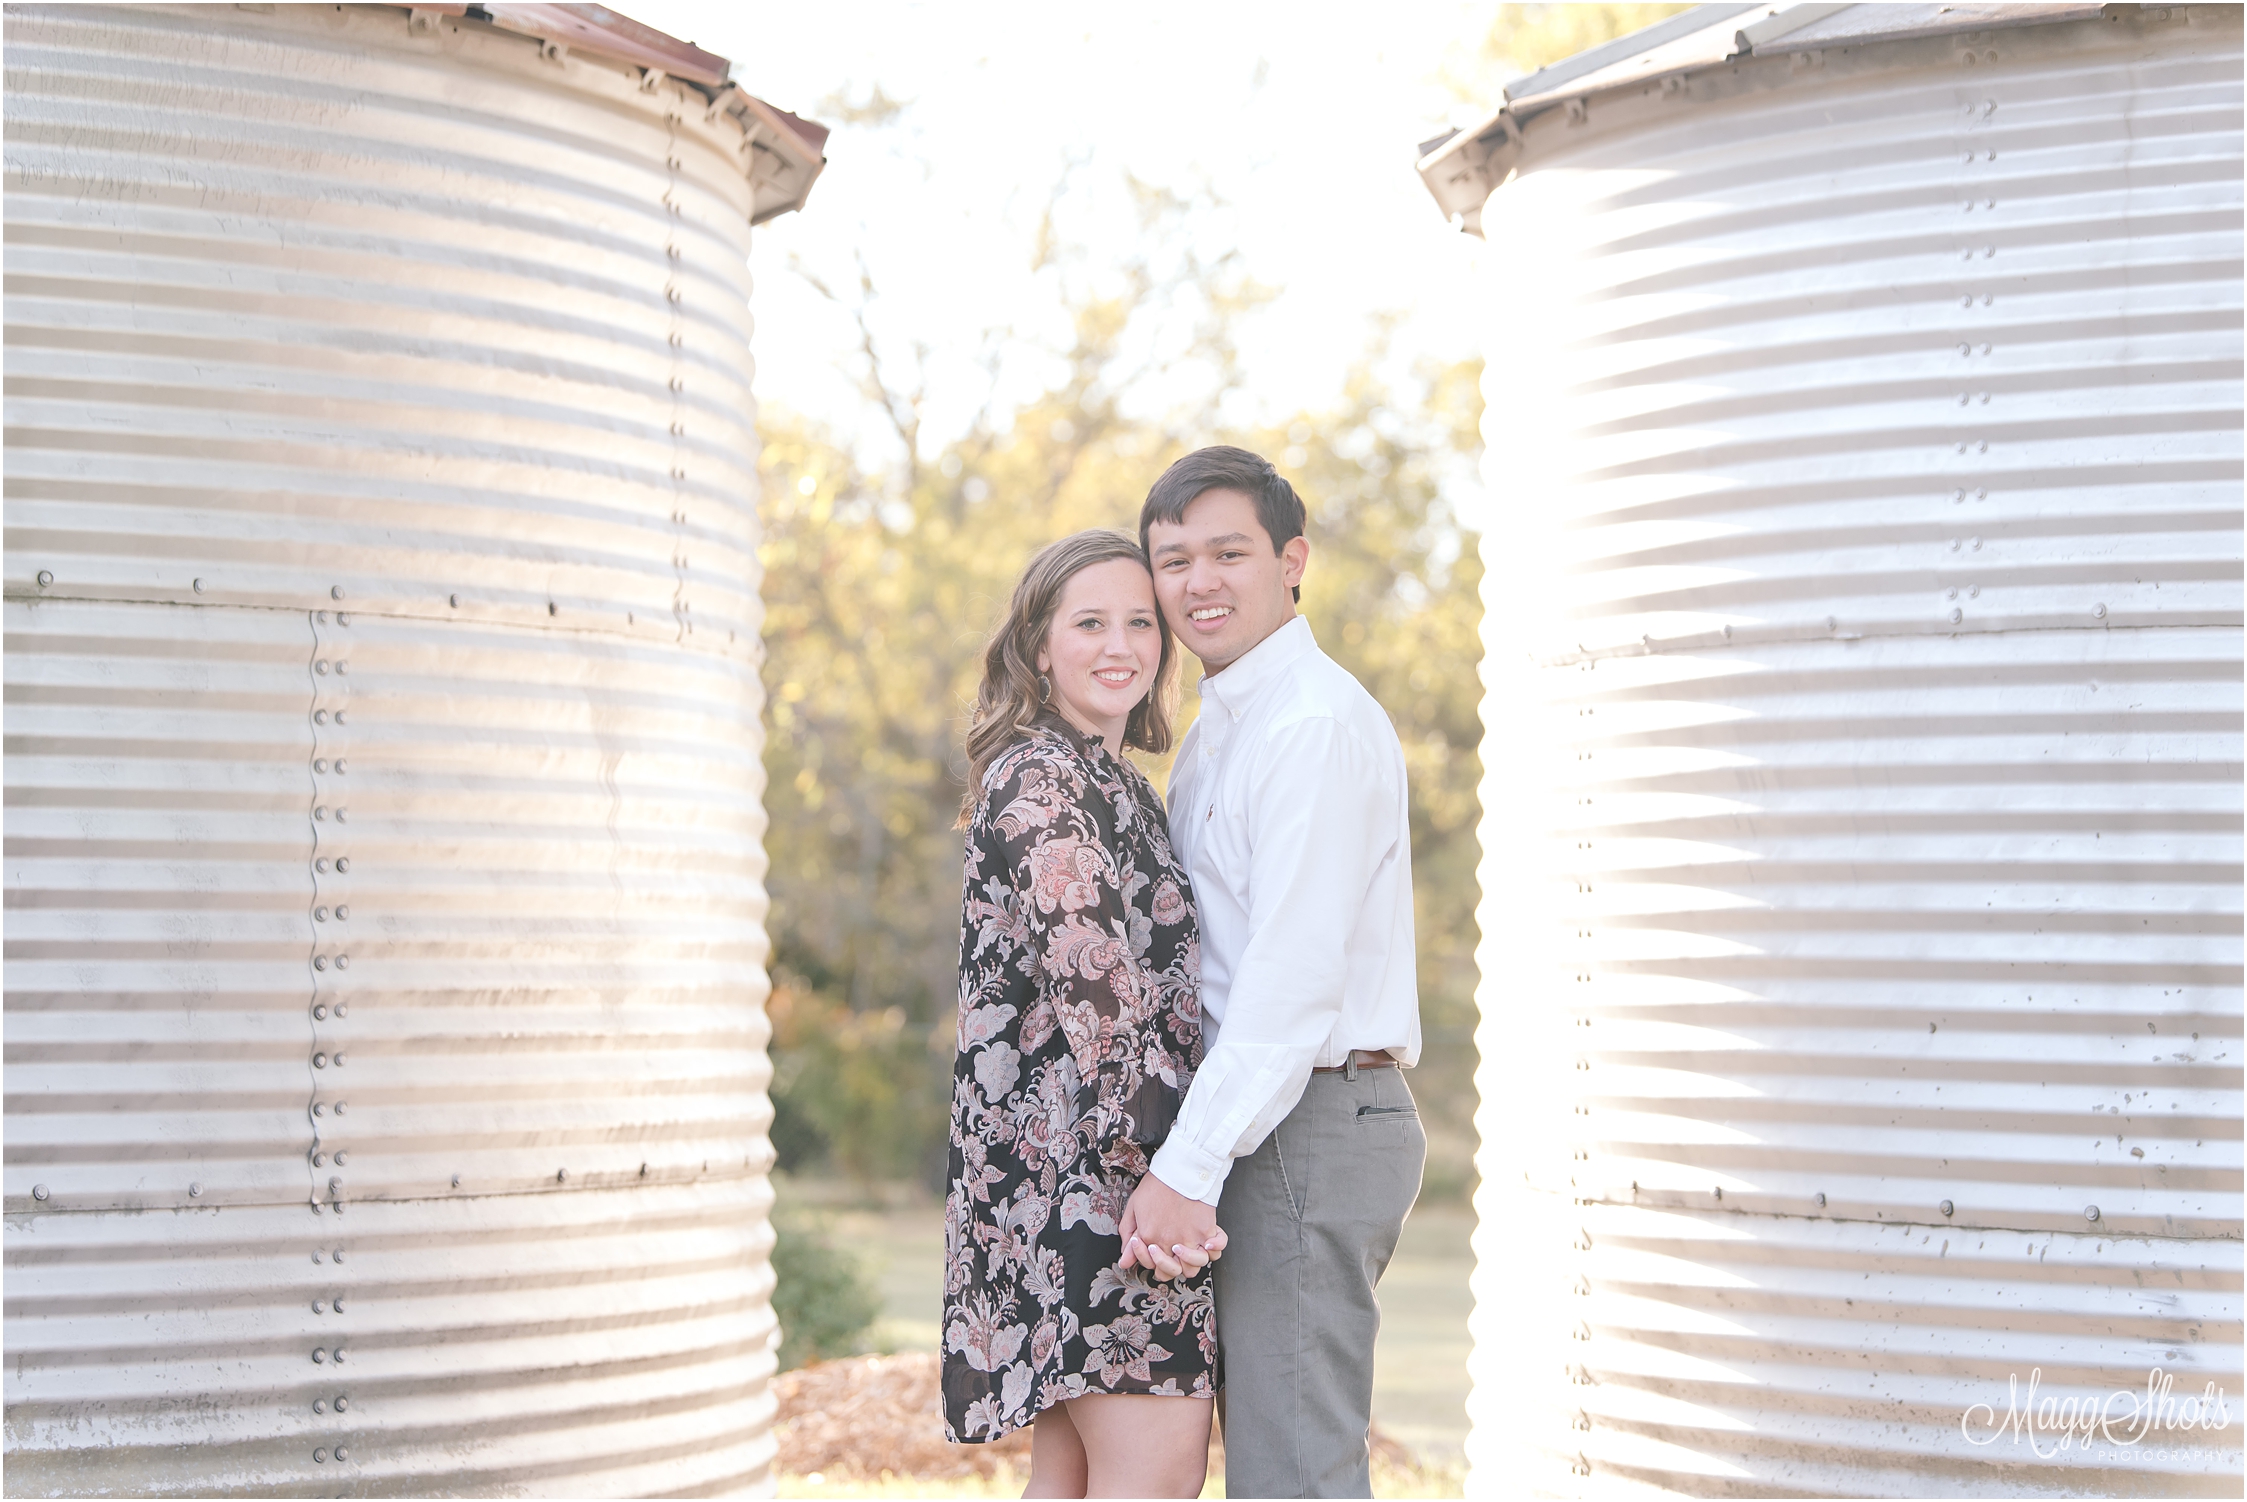 Engagements, Love, Bride and Groom, Green, Engaged, Wedding, MaggShots Photography, MaggShots, Professional Photographer, Porfessional Photography, DFW Wedding Photographer, Silos